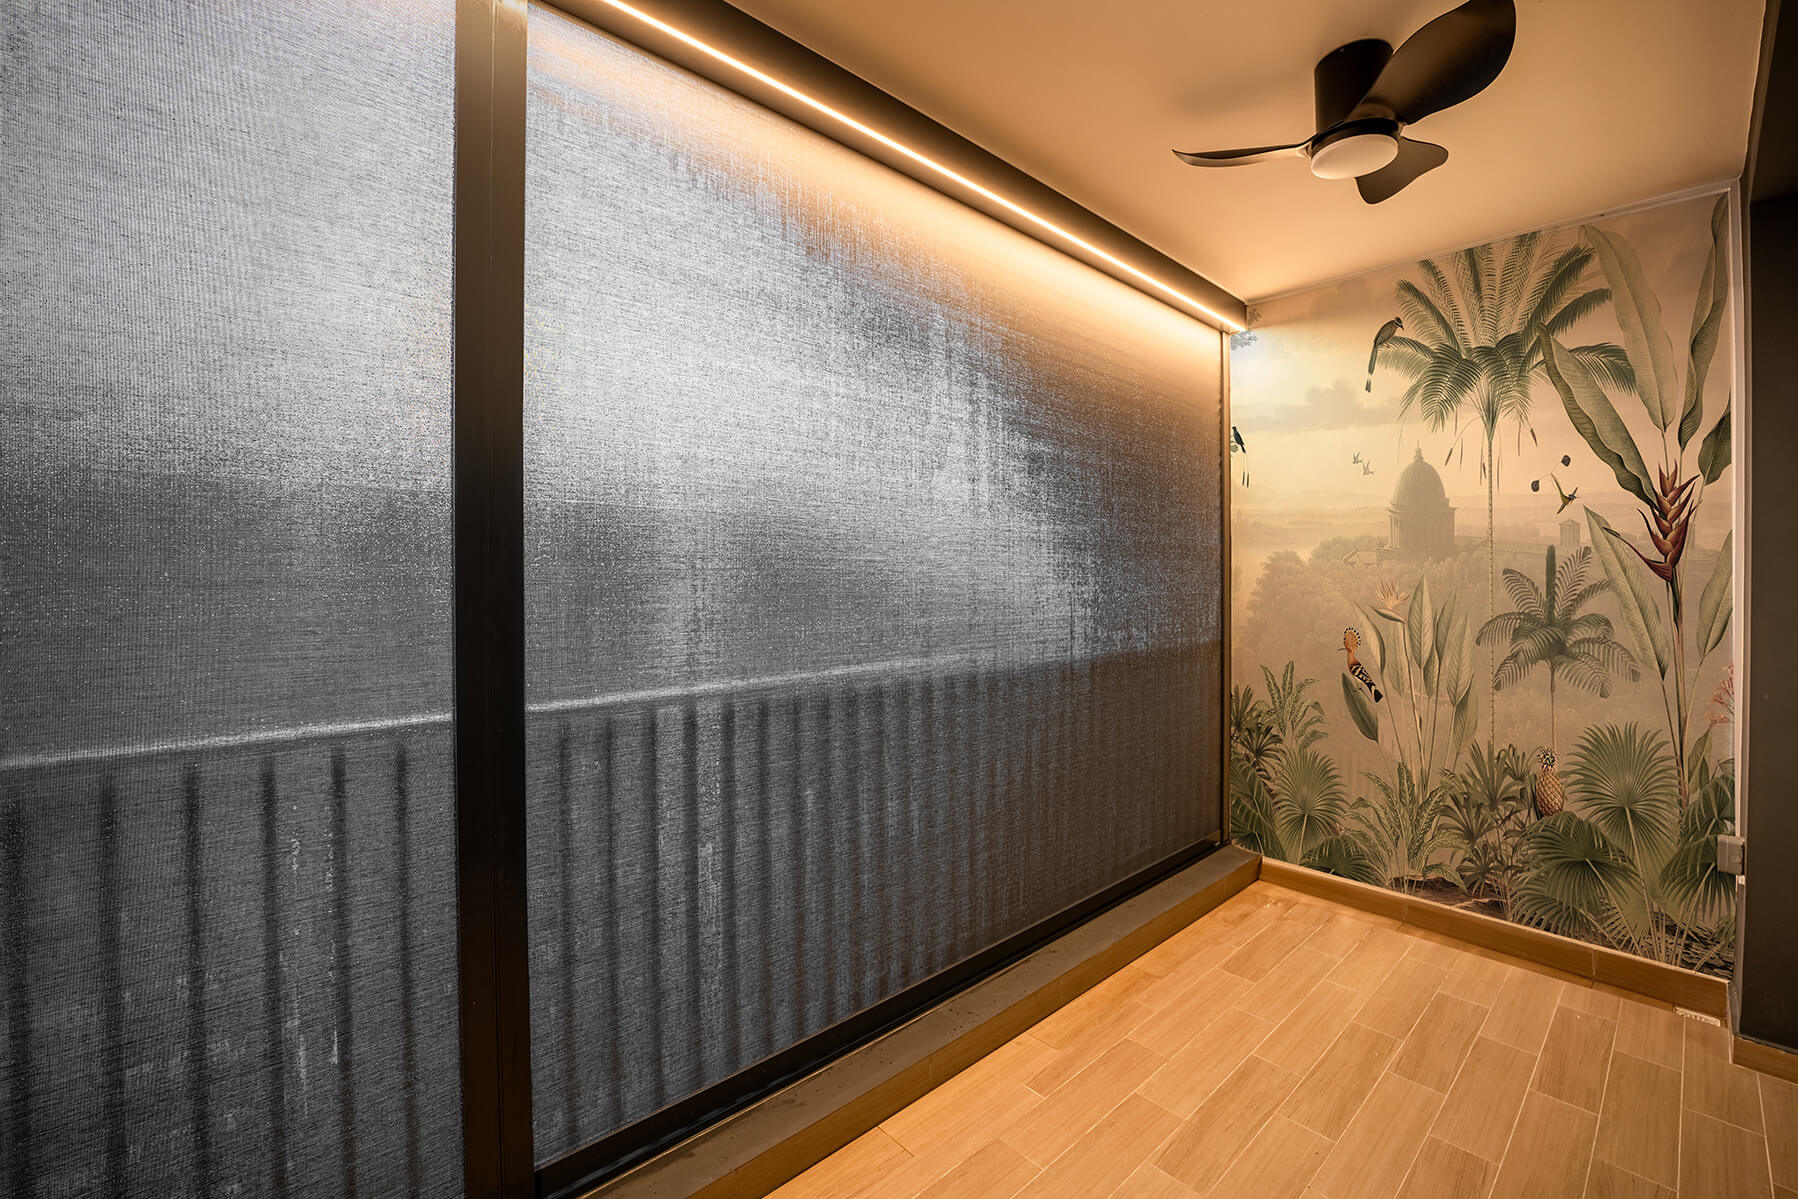 A balcony in Singapore featuring zip blinds, also known as zip track outdoor blinds, installed for renovation purposes. The blinds are partially closed, showing a tasteful tropical-themed mural on the adjacent wall, with palm trees, exotic birds, and a historical building in the background. Warm lighting from above casts a soft glow on the elegant wooden flooring and the sleek, modern ceiling fan adds a contemporary touch.